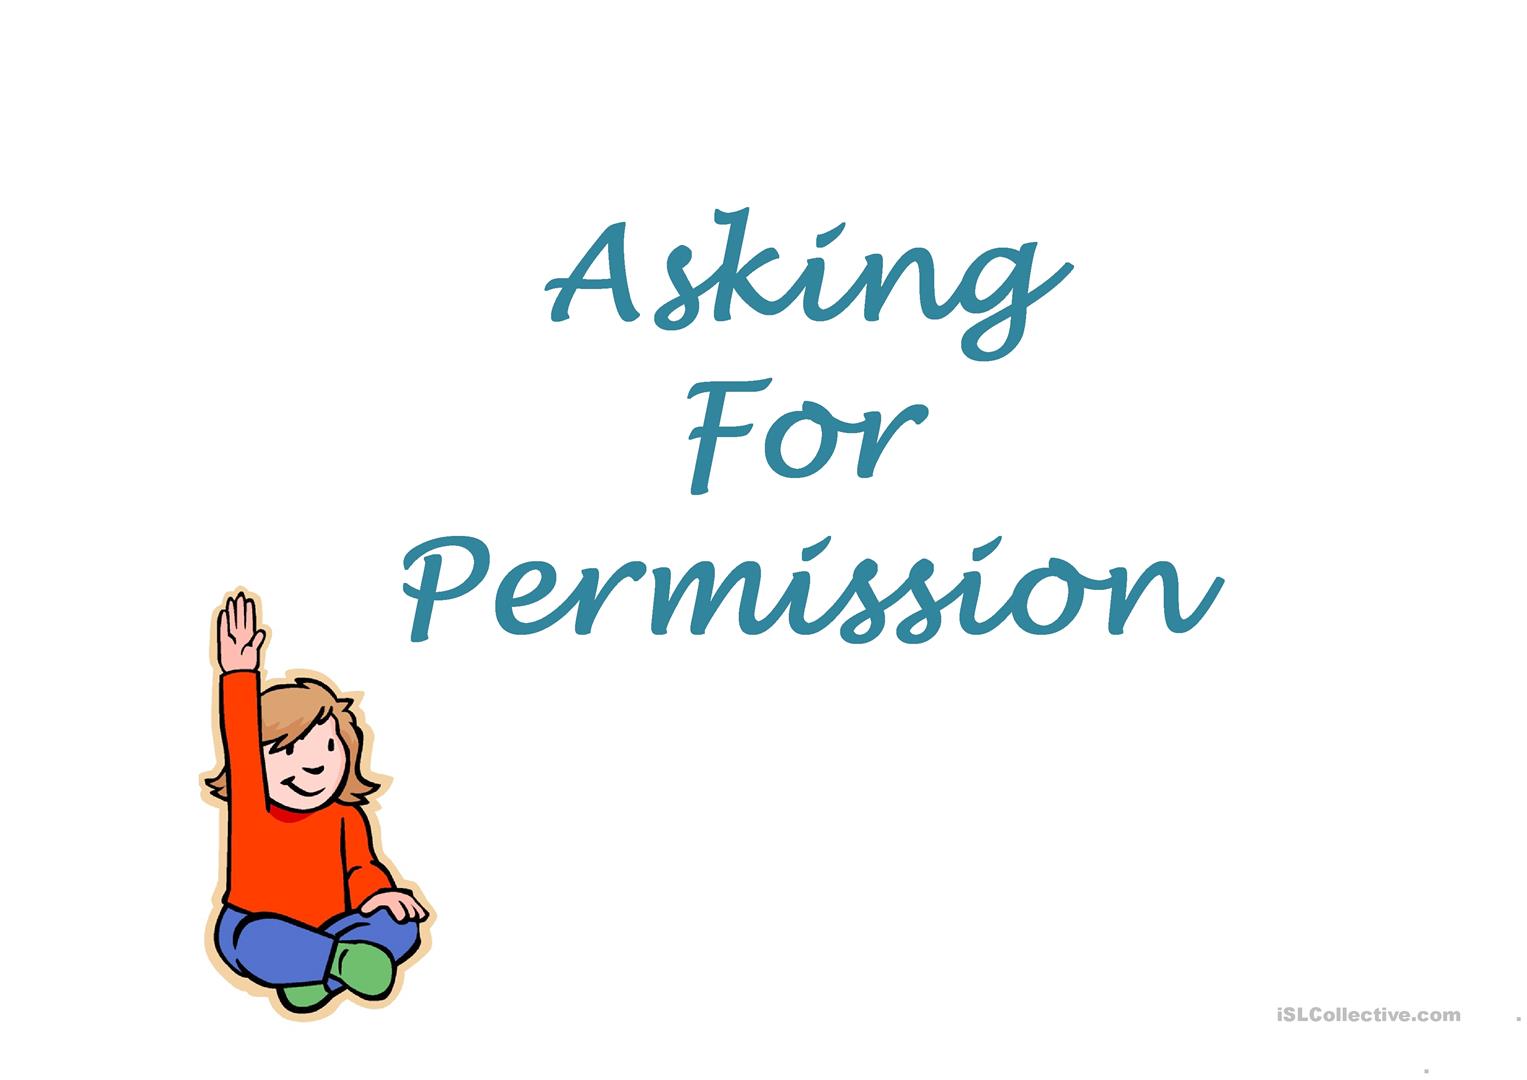 Asking for permission.